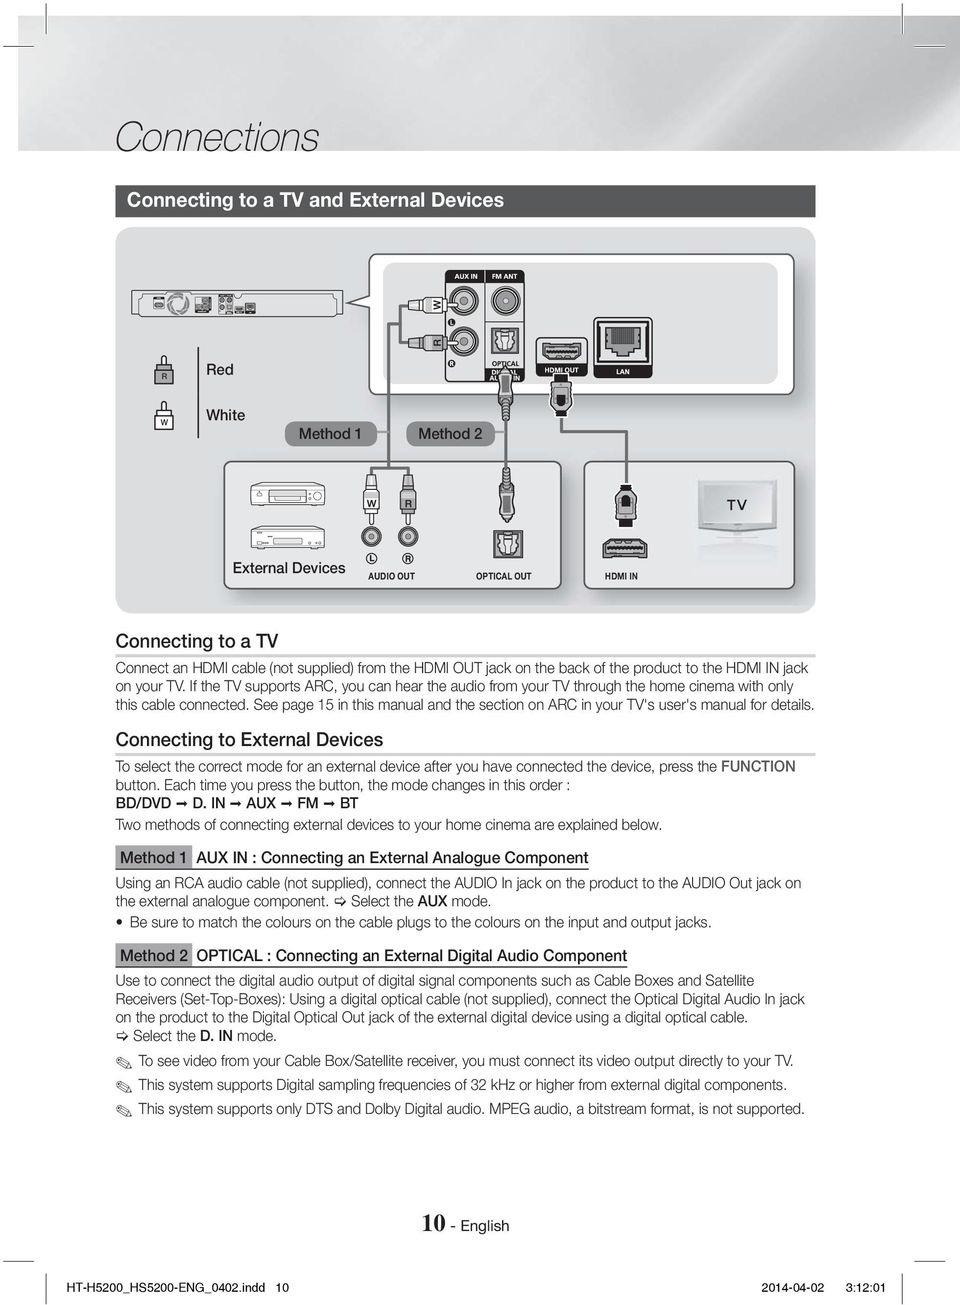 See page 15 in this manual and the section on ARC in your TV's user's manual for details.